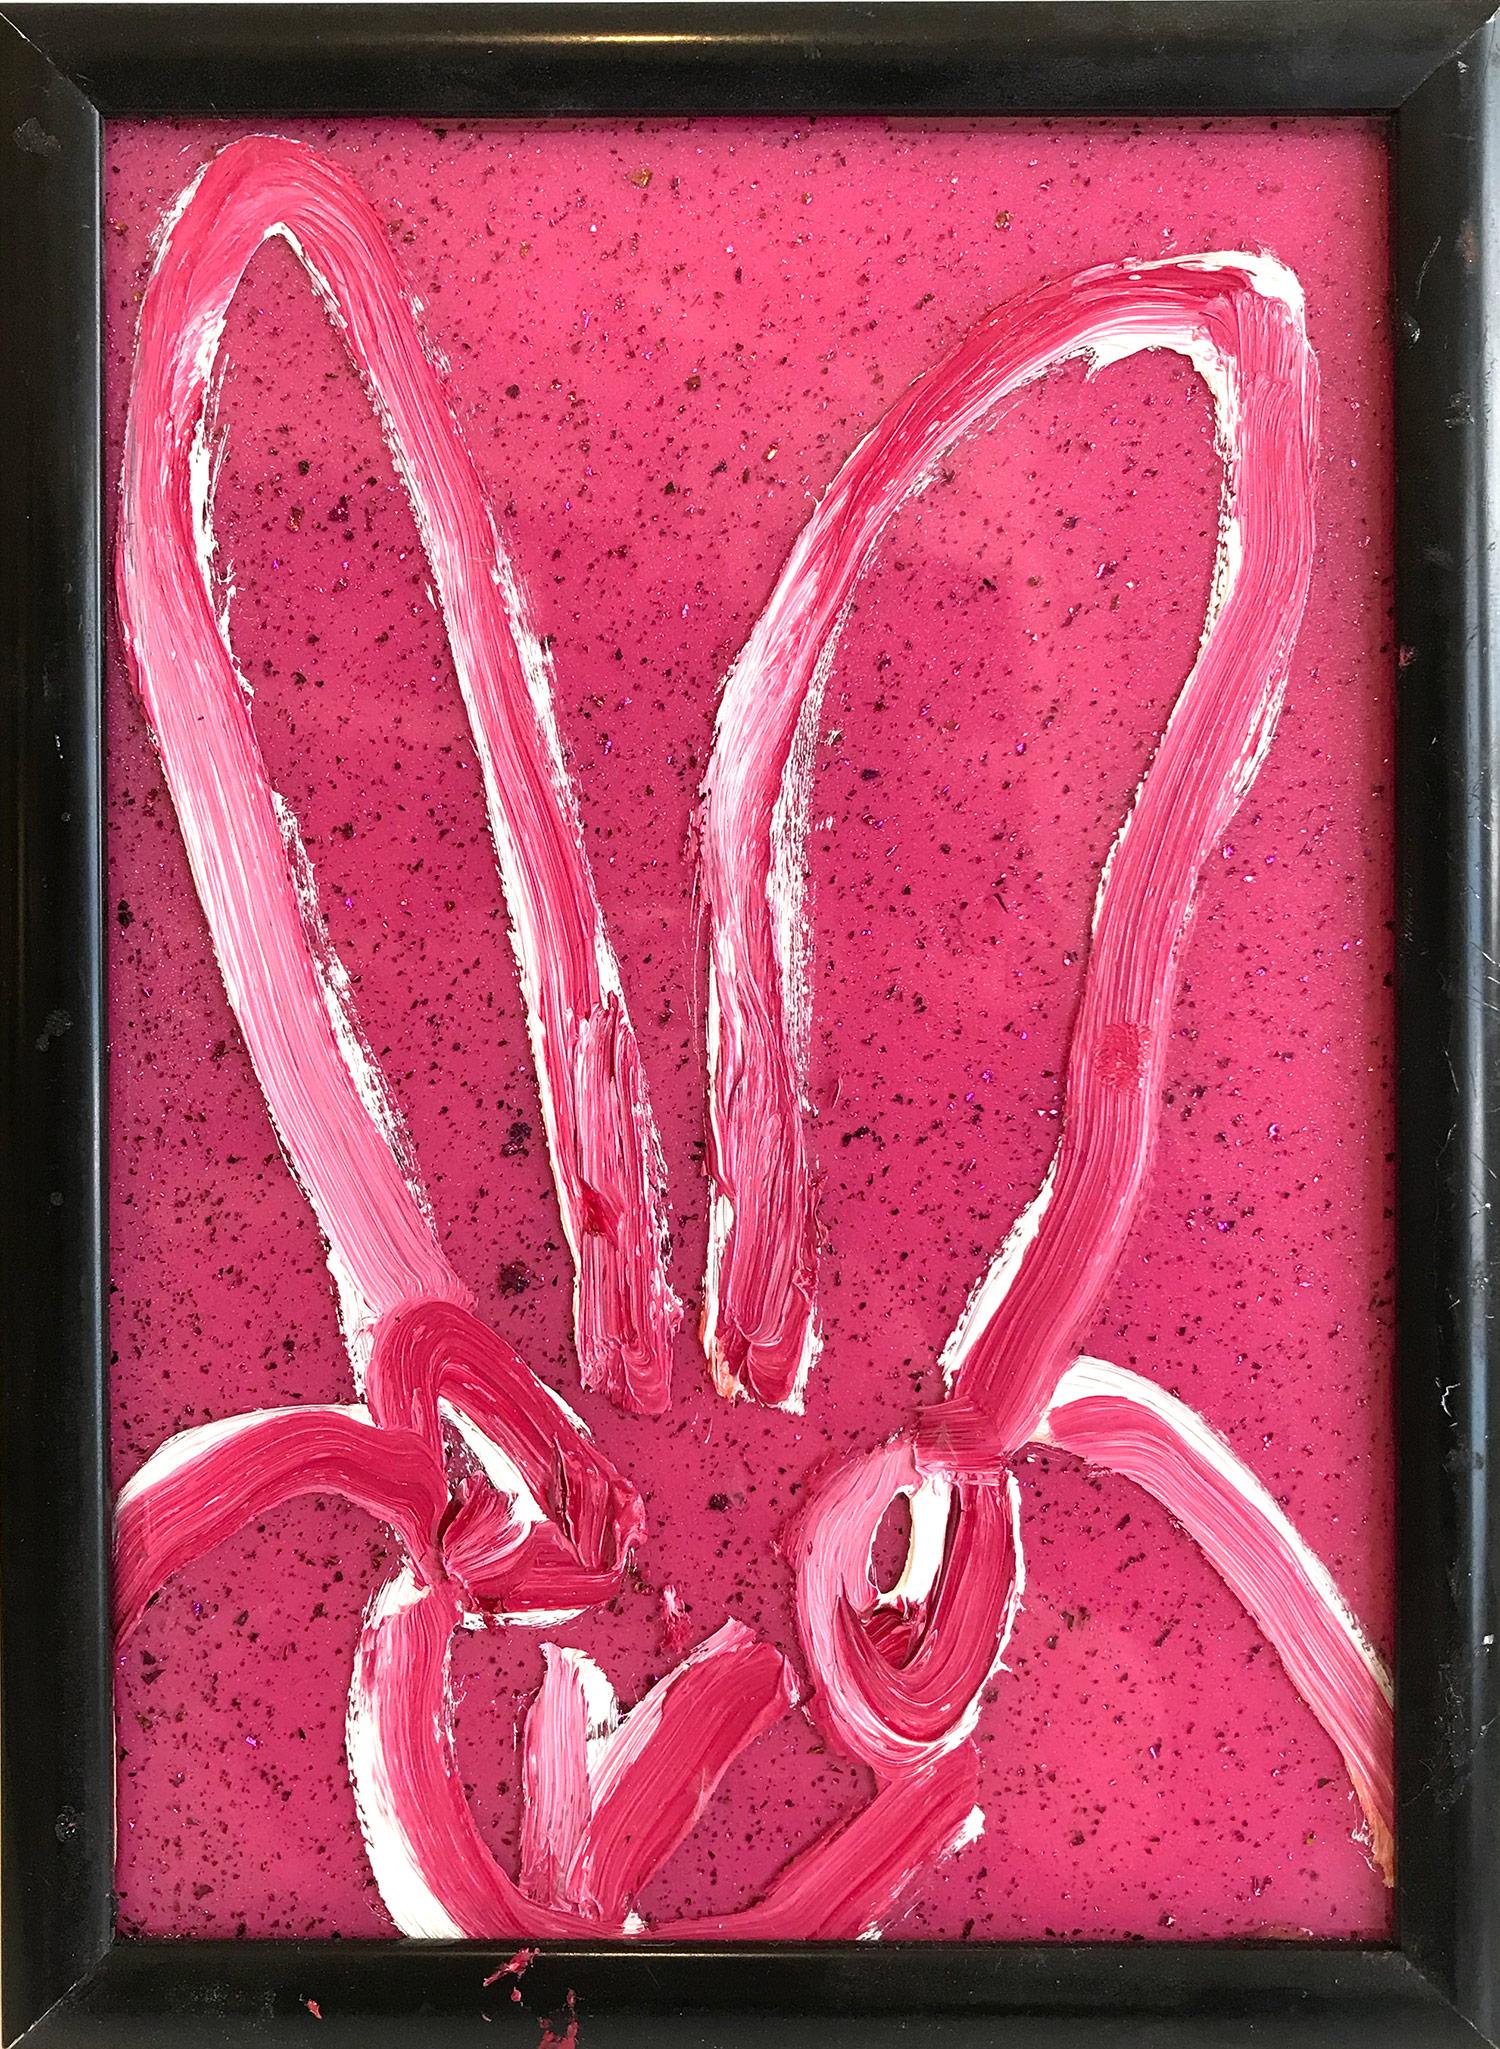 Hunt Slonem Abstract Painting - "Untitled" (Resin and Diamond Dust Bunny on Pink) Oil Painting on Wood Panel